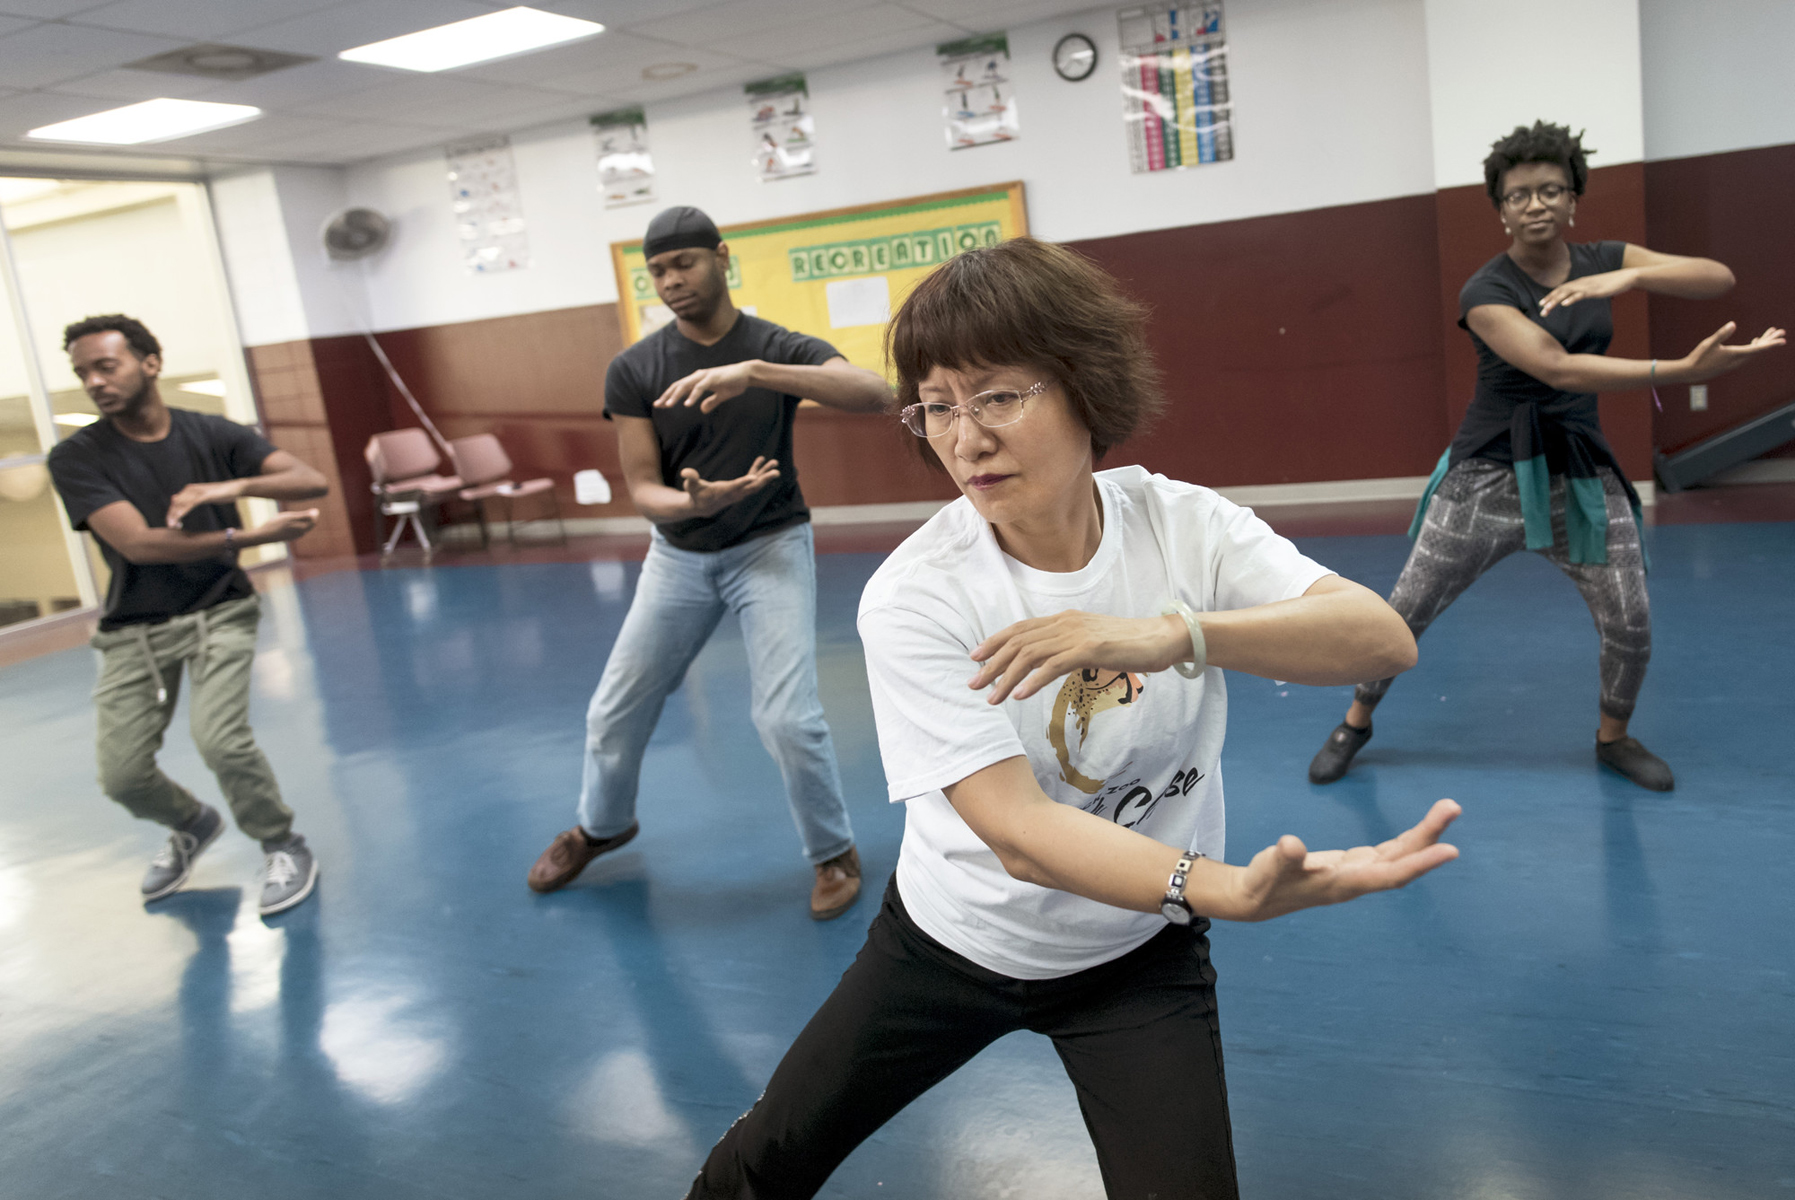 Visiting scholar, Huang Li, from Huaxia University in Xiamen, China teaches tai chi for the fitness center on Jan. 20, 2016, in DSC. Tai chi is an ancient Chinese tradition that, today, is practiced as a graceful form of exercise. It involves a series of movements performed in a slow, focused manner and accompanied by deep breathing.